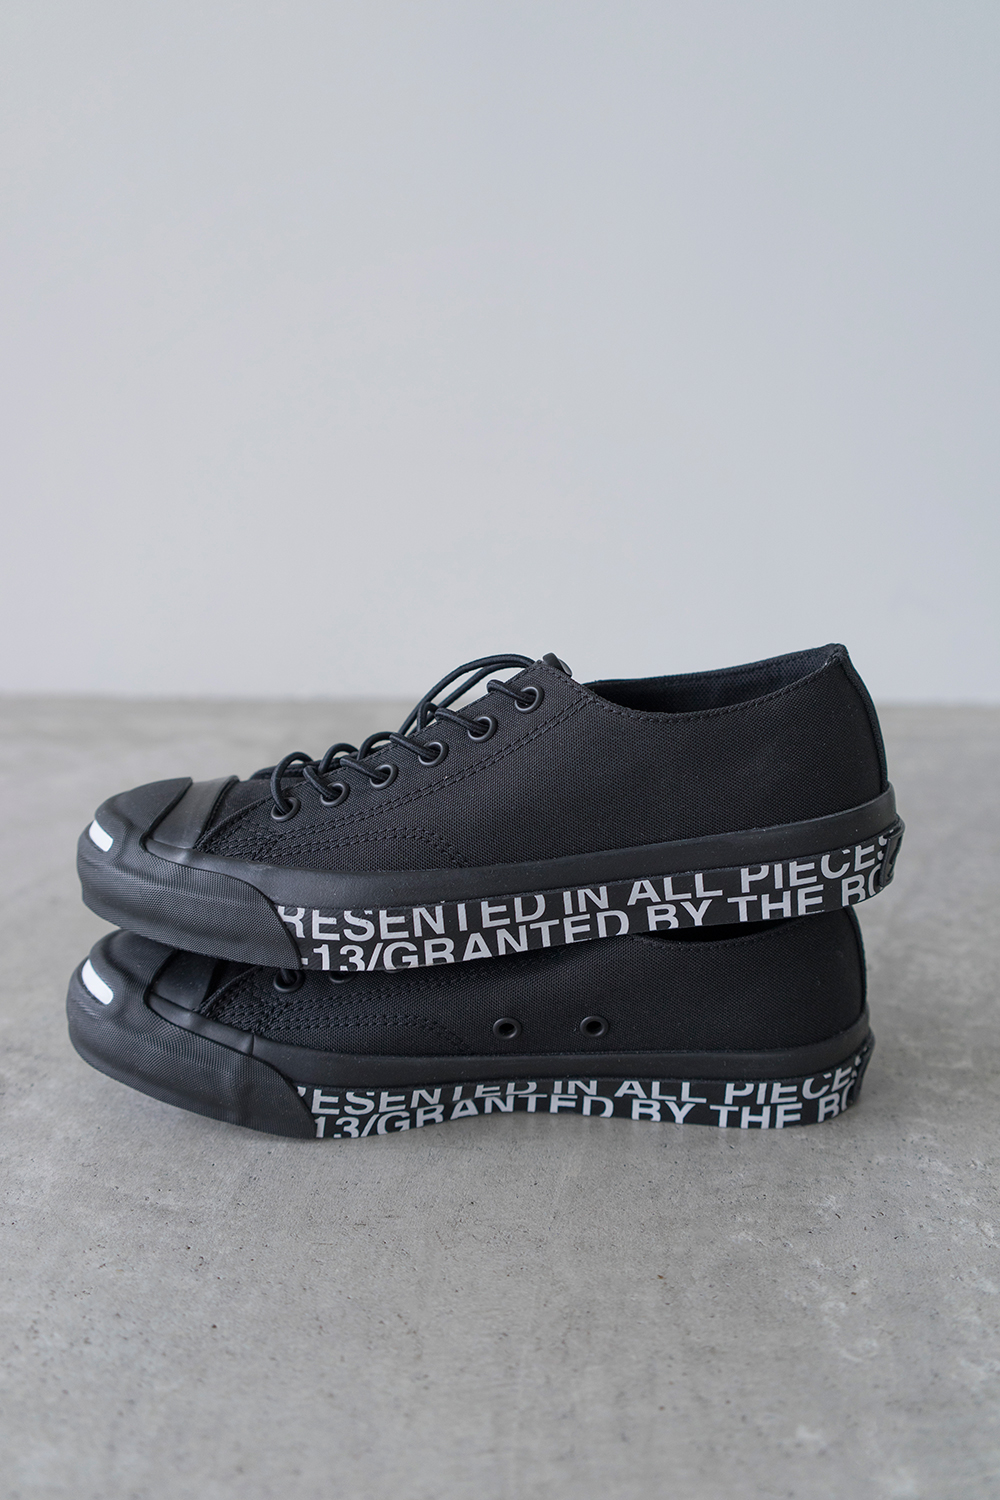 CONVERSE × ZUCCaの『JACK PURCELL』